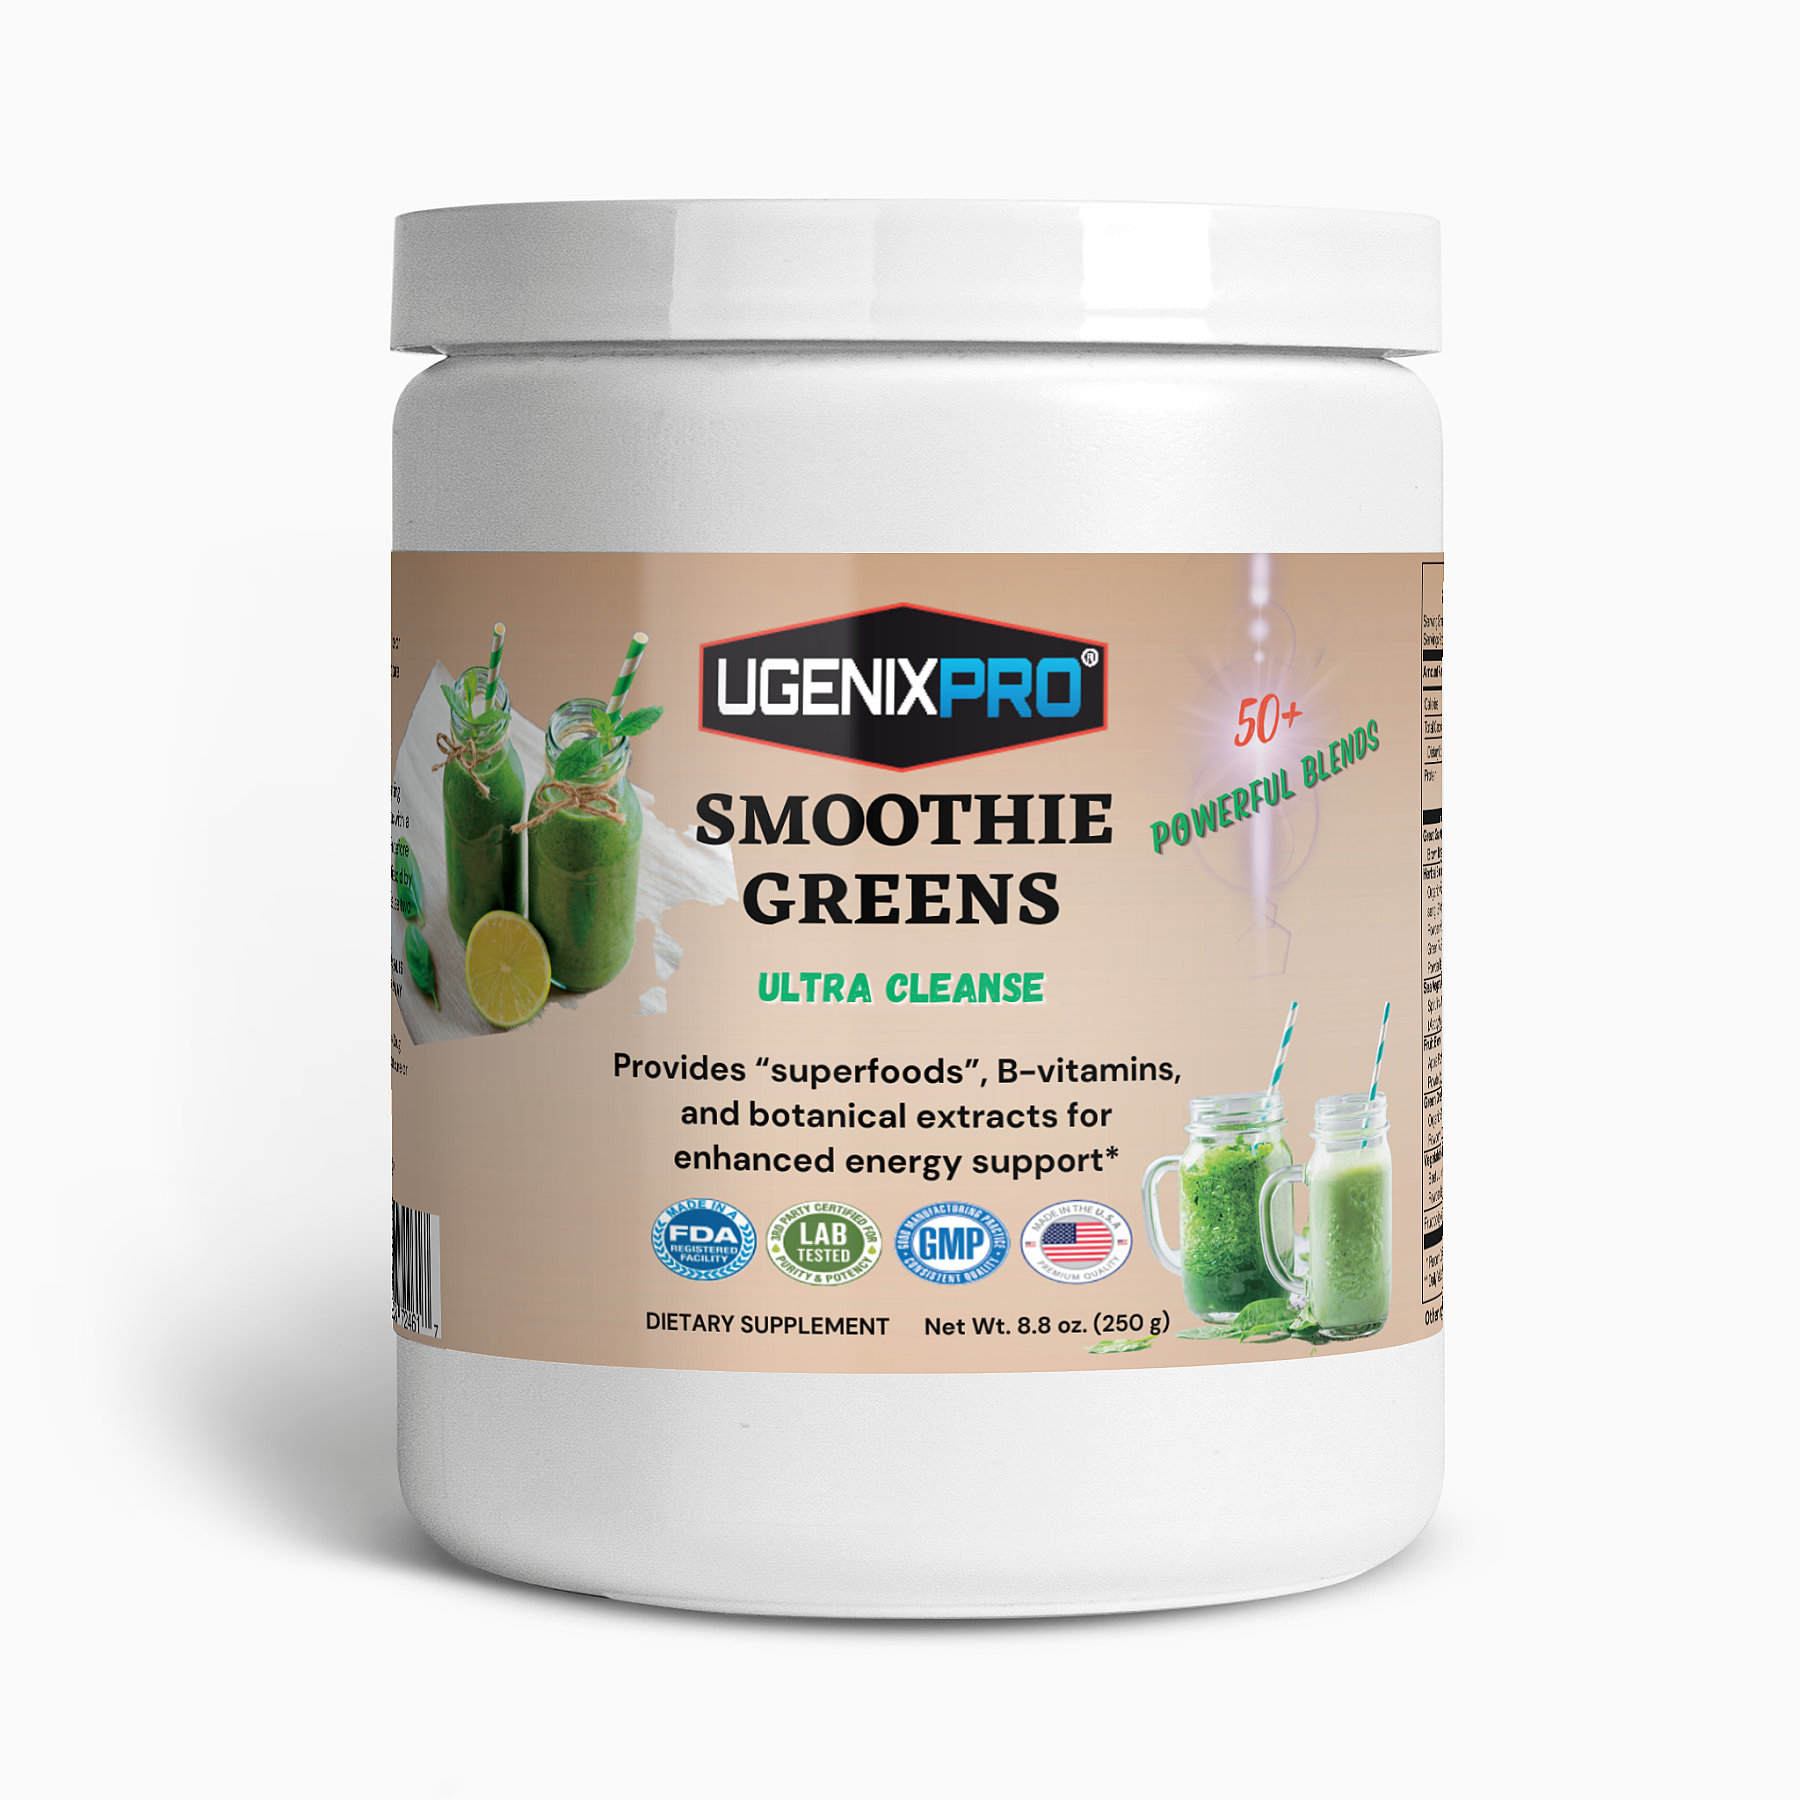 UgenixPRO® Ultra Cleanse Smoothie Greens Superfood 50 Servings | Overall Wellness | Promotes Liver Help | Antioxidant | Improves Energy | 50+ Powerful Ingredients Blend